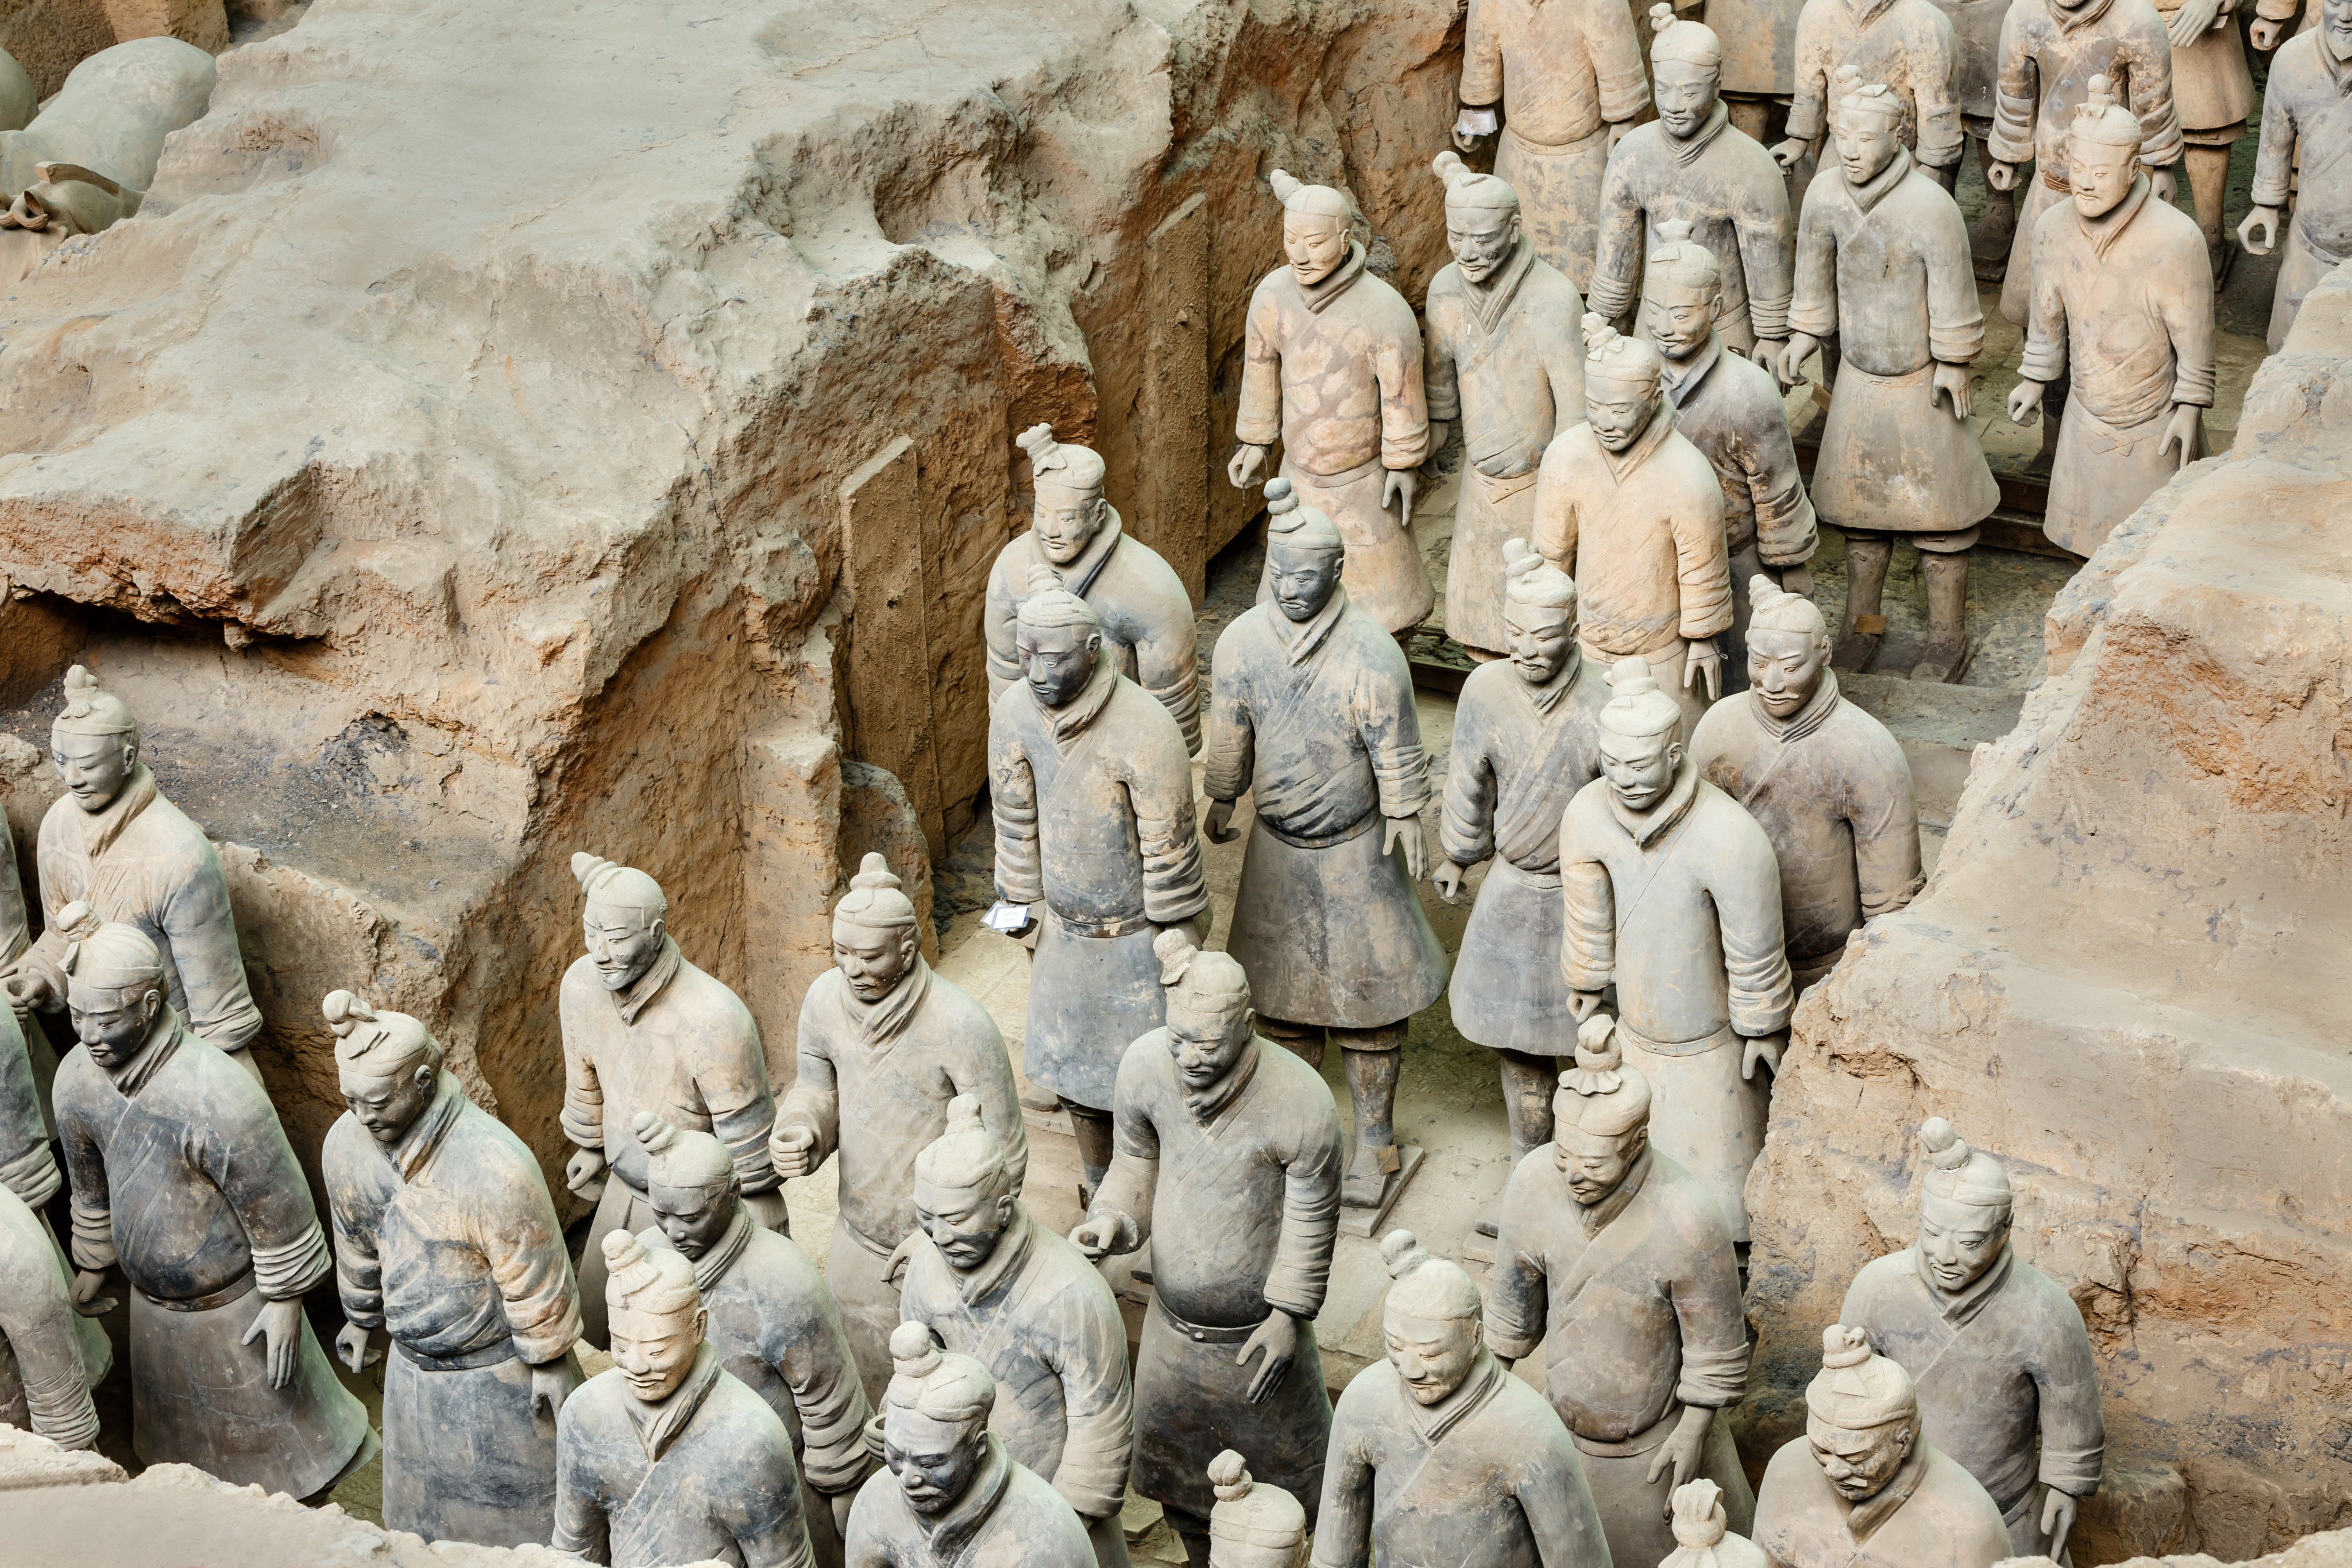 The Terracotta Army is made up of over 8,000 life-size clay soldiers and they all look different. Photo: Shutterstock